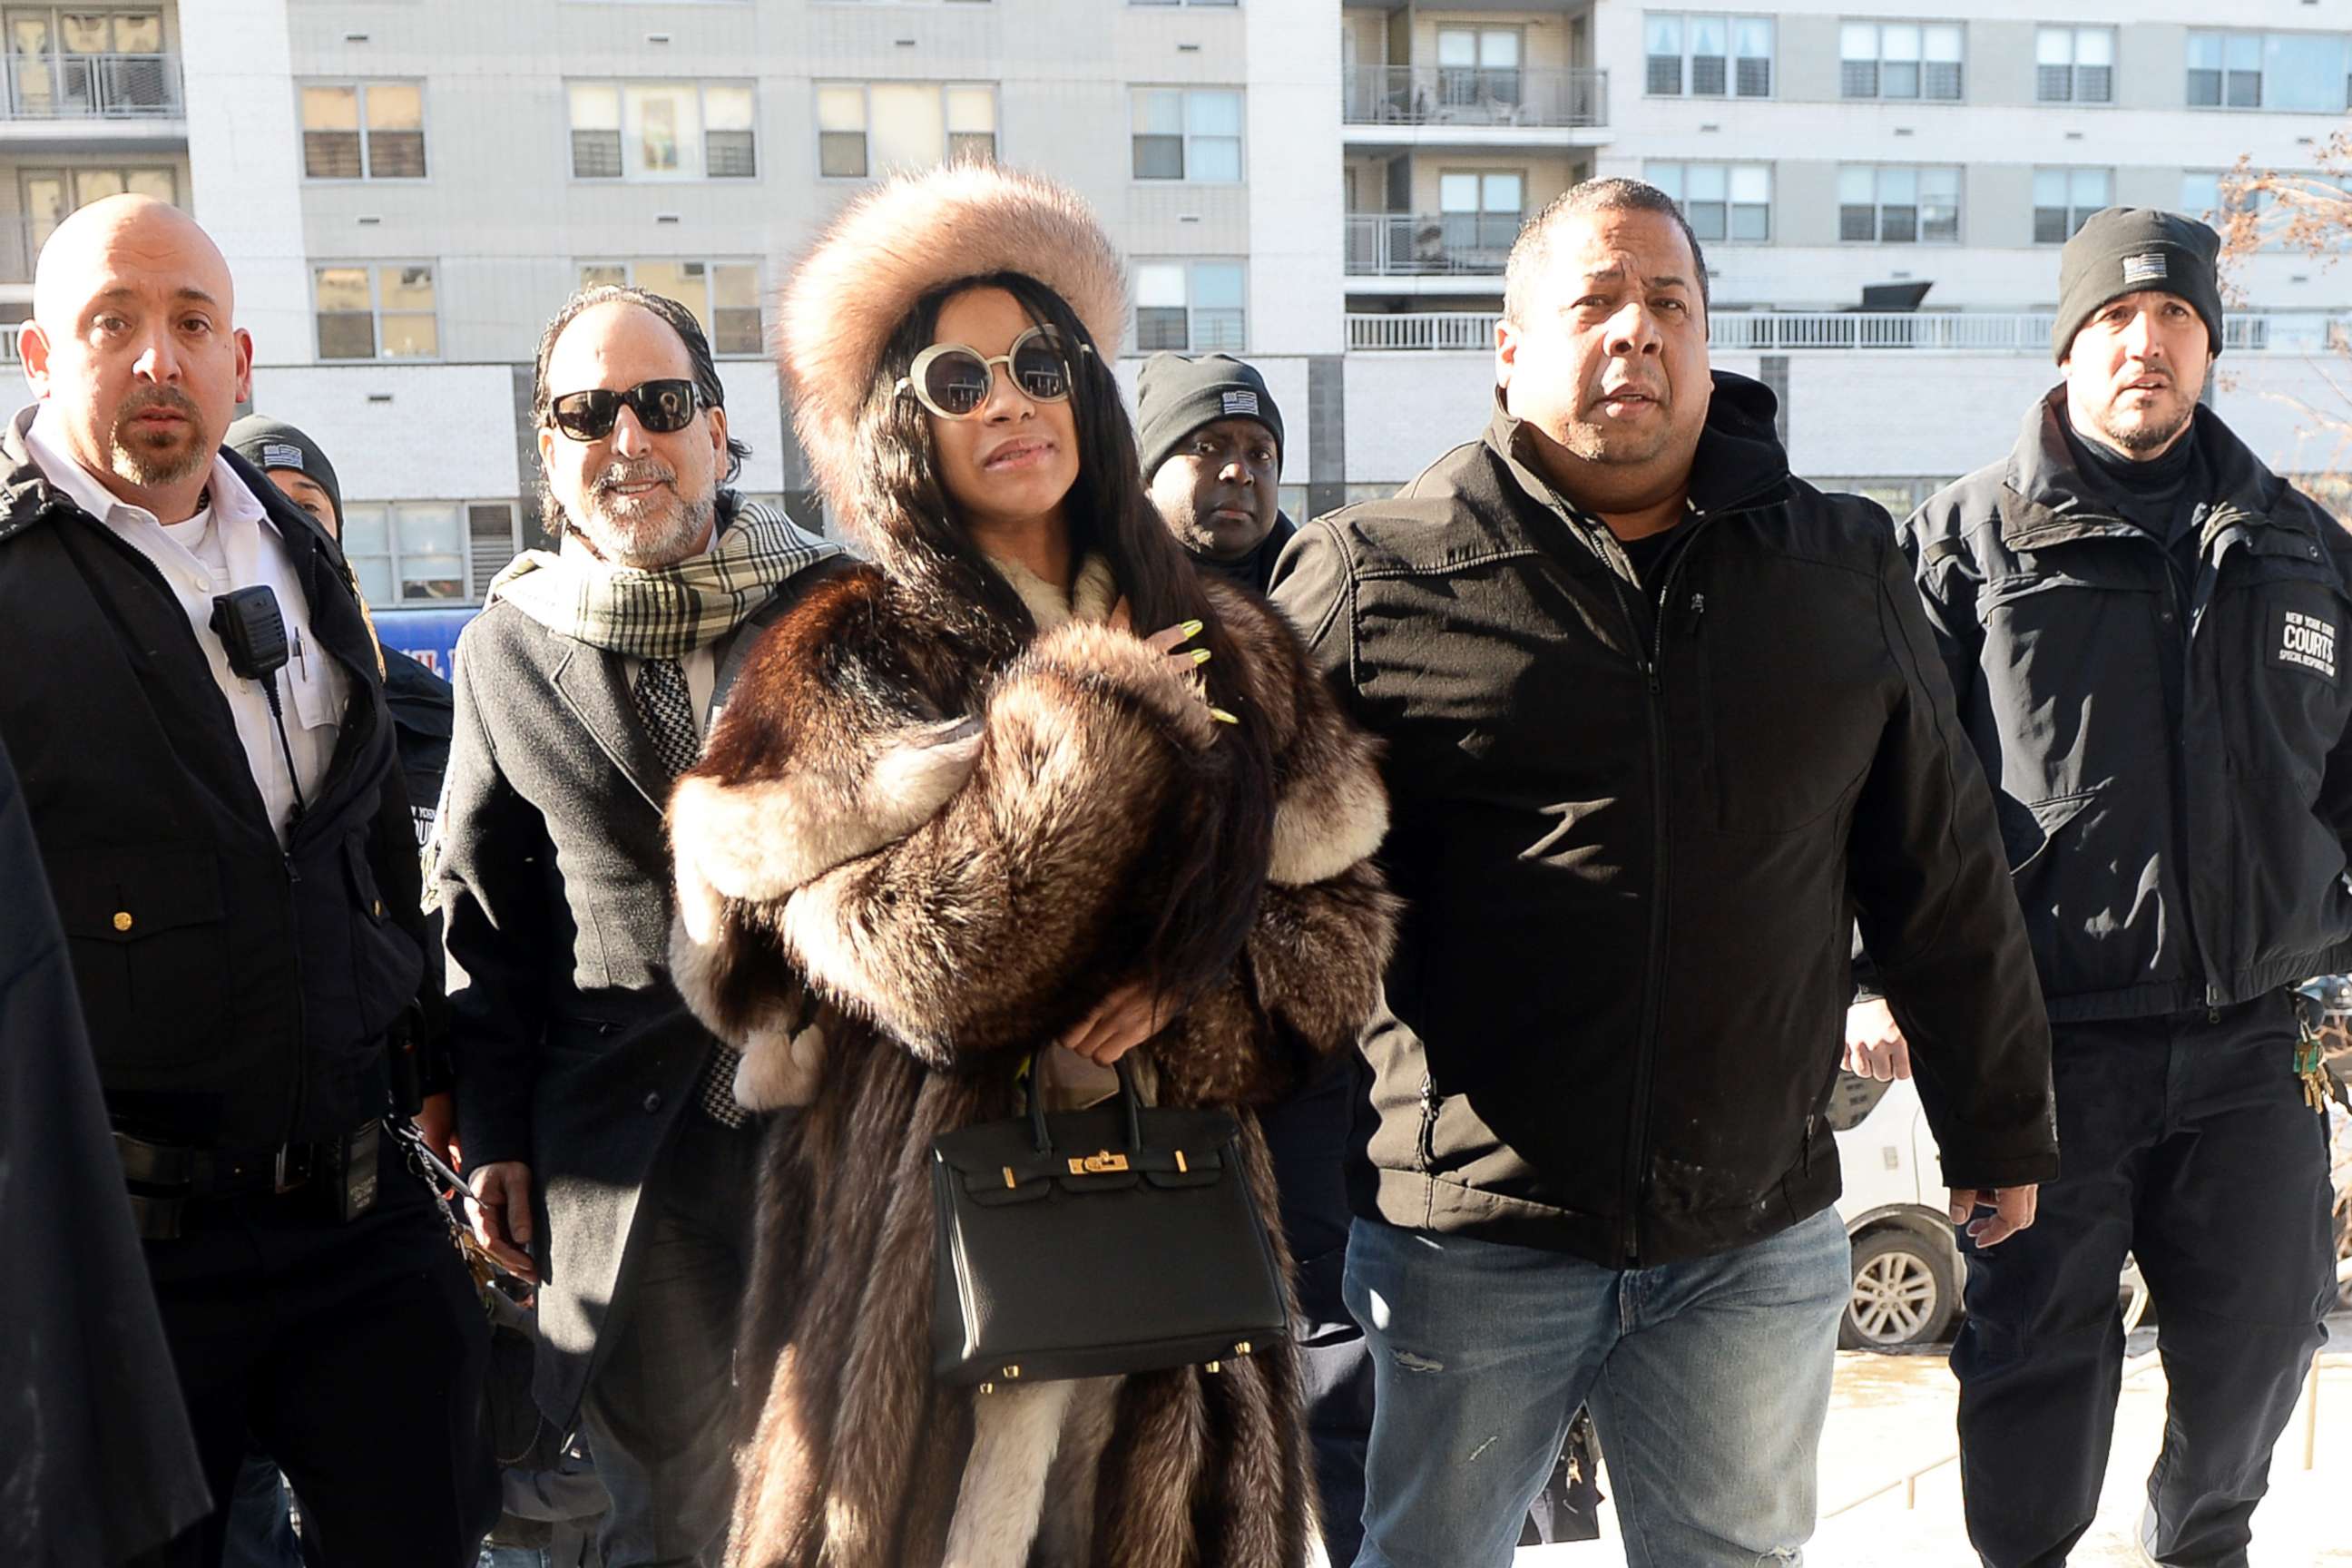 PHOTO: Cardi B Arrives at Queens county criminal court in New York over charges in connection with an alleged assault at strip club, Jan. 31, 2019.